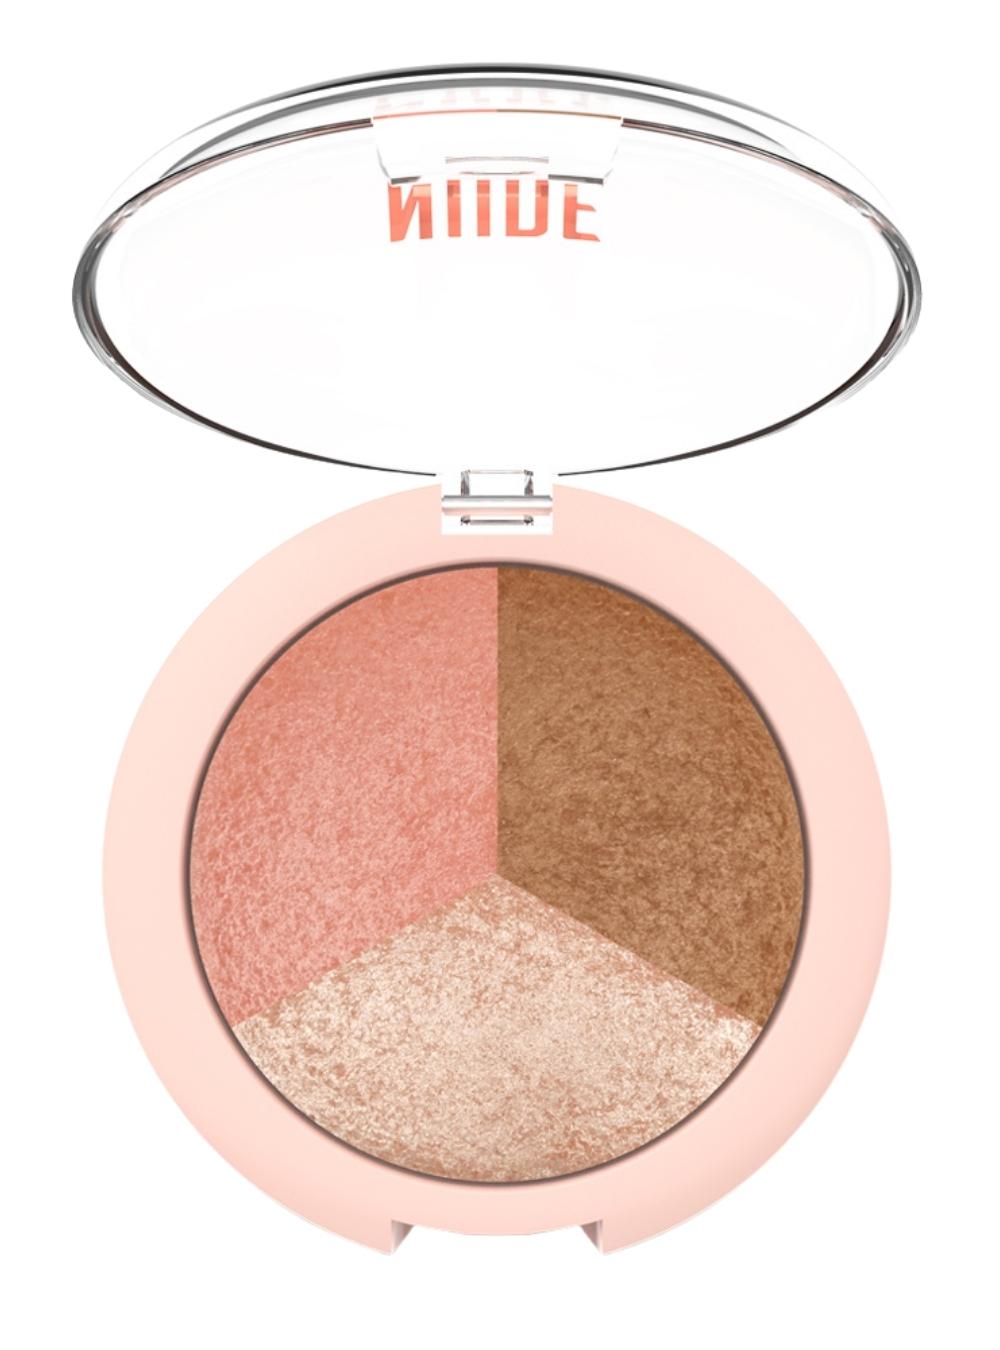 Nude Look Baked Trio Face Powder-340 Other Accessories-Celesty-Heathered Boho Boutique, Women's Fashion and Accessories in Palmetto, FL